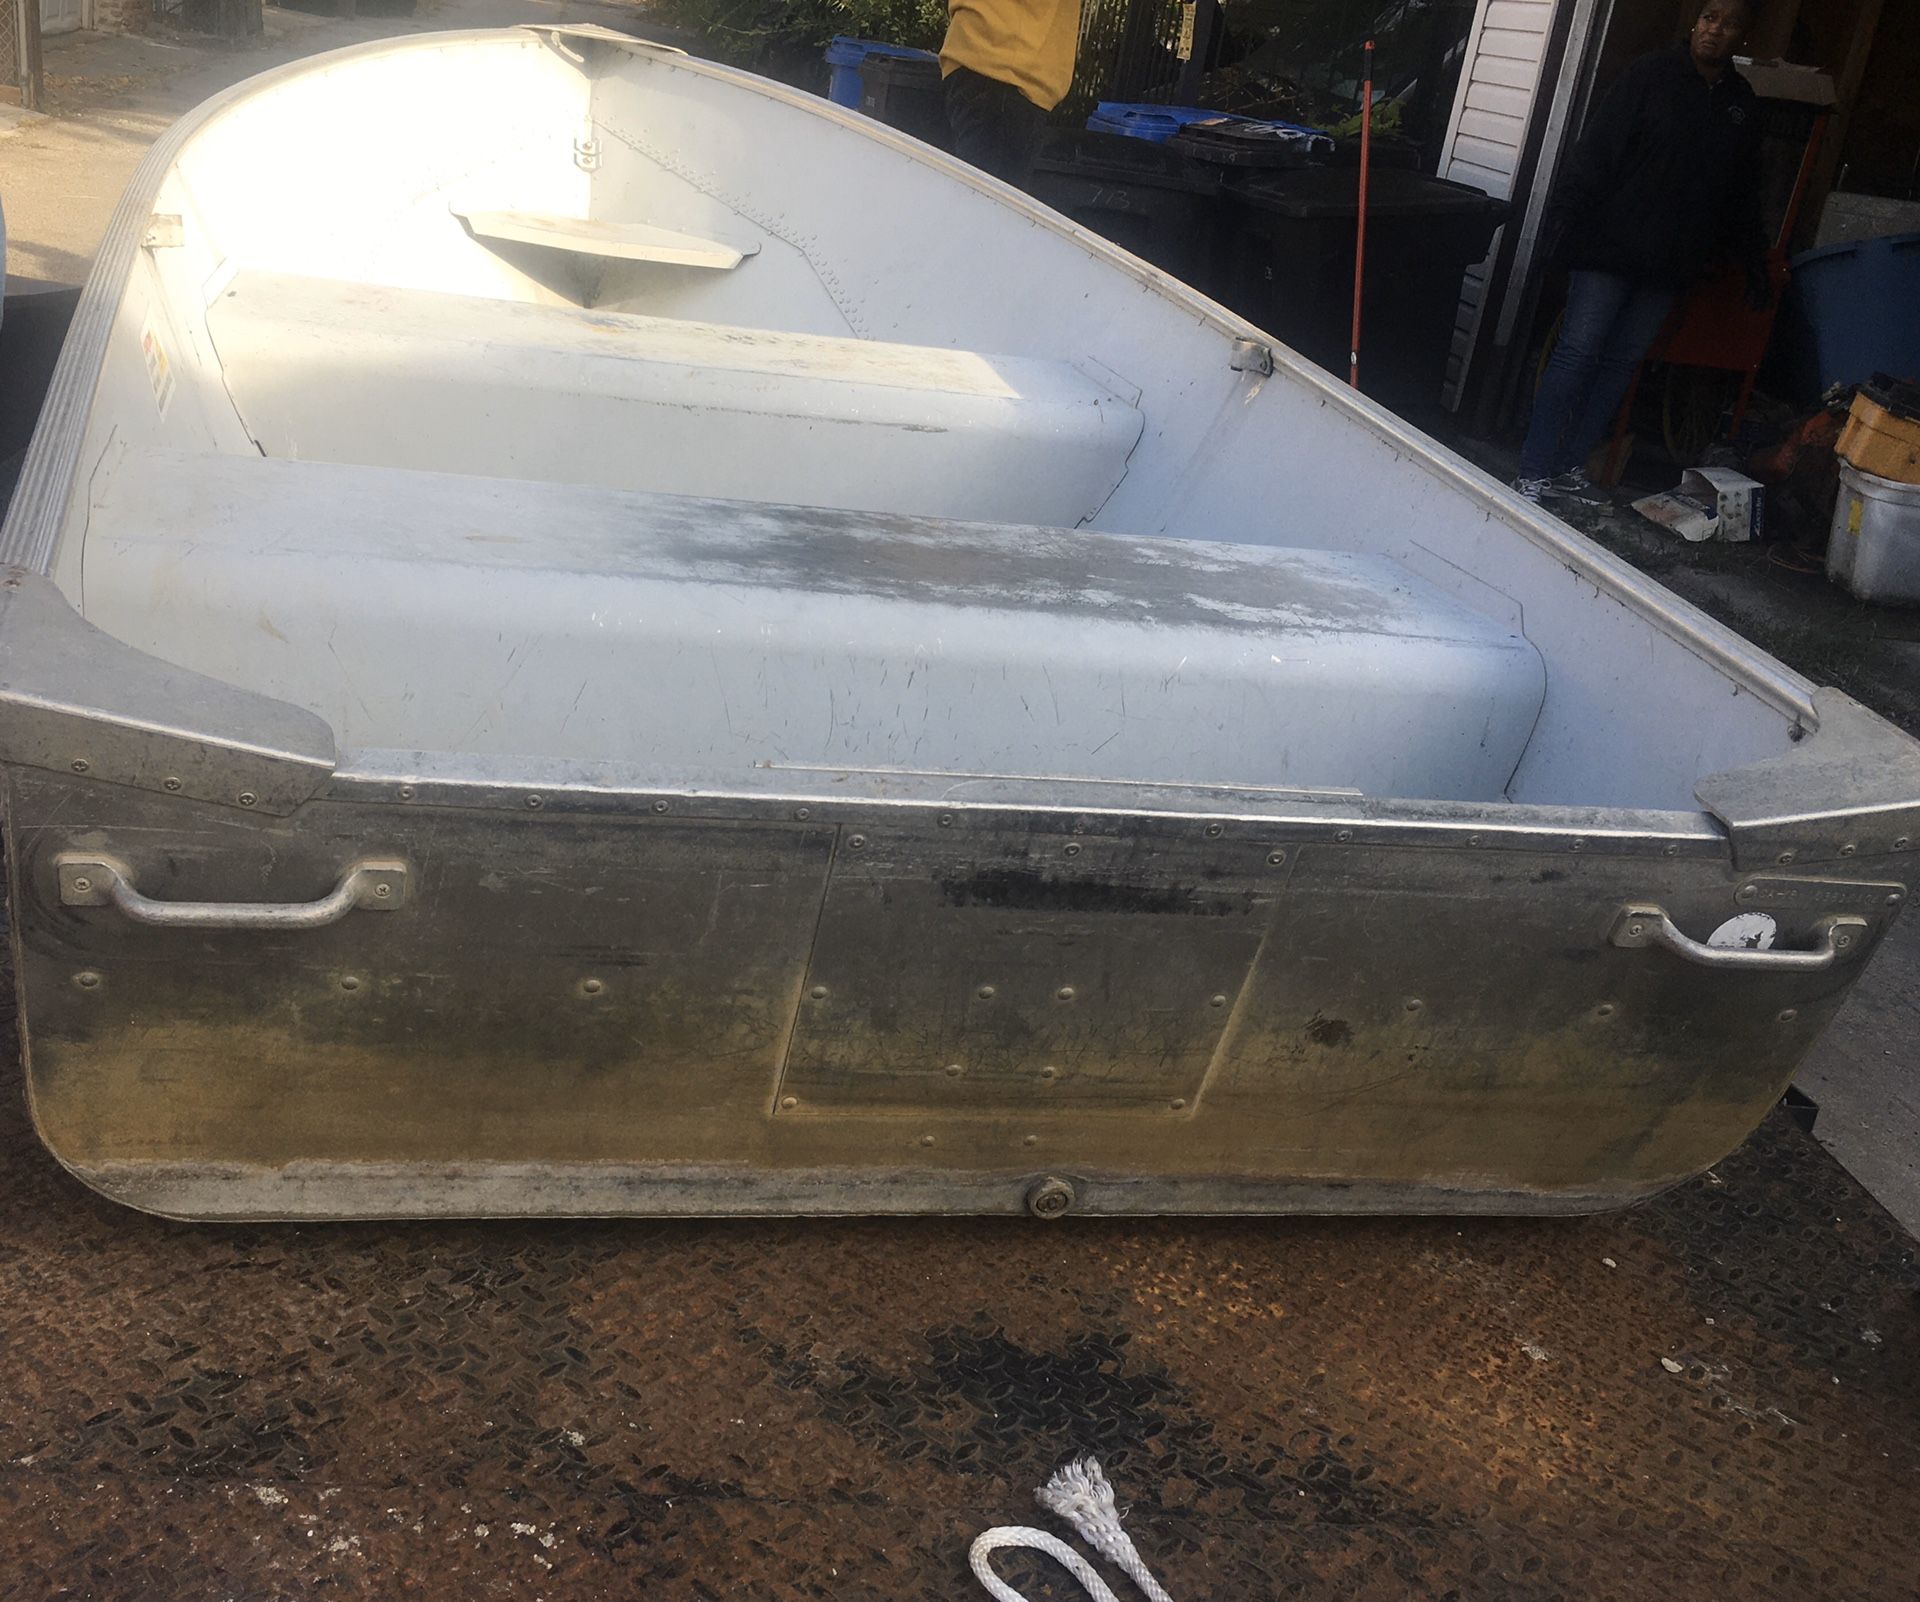 (2) Lund aluminum Fishing Boats each $450